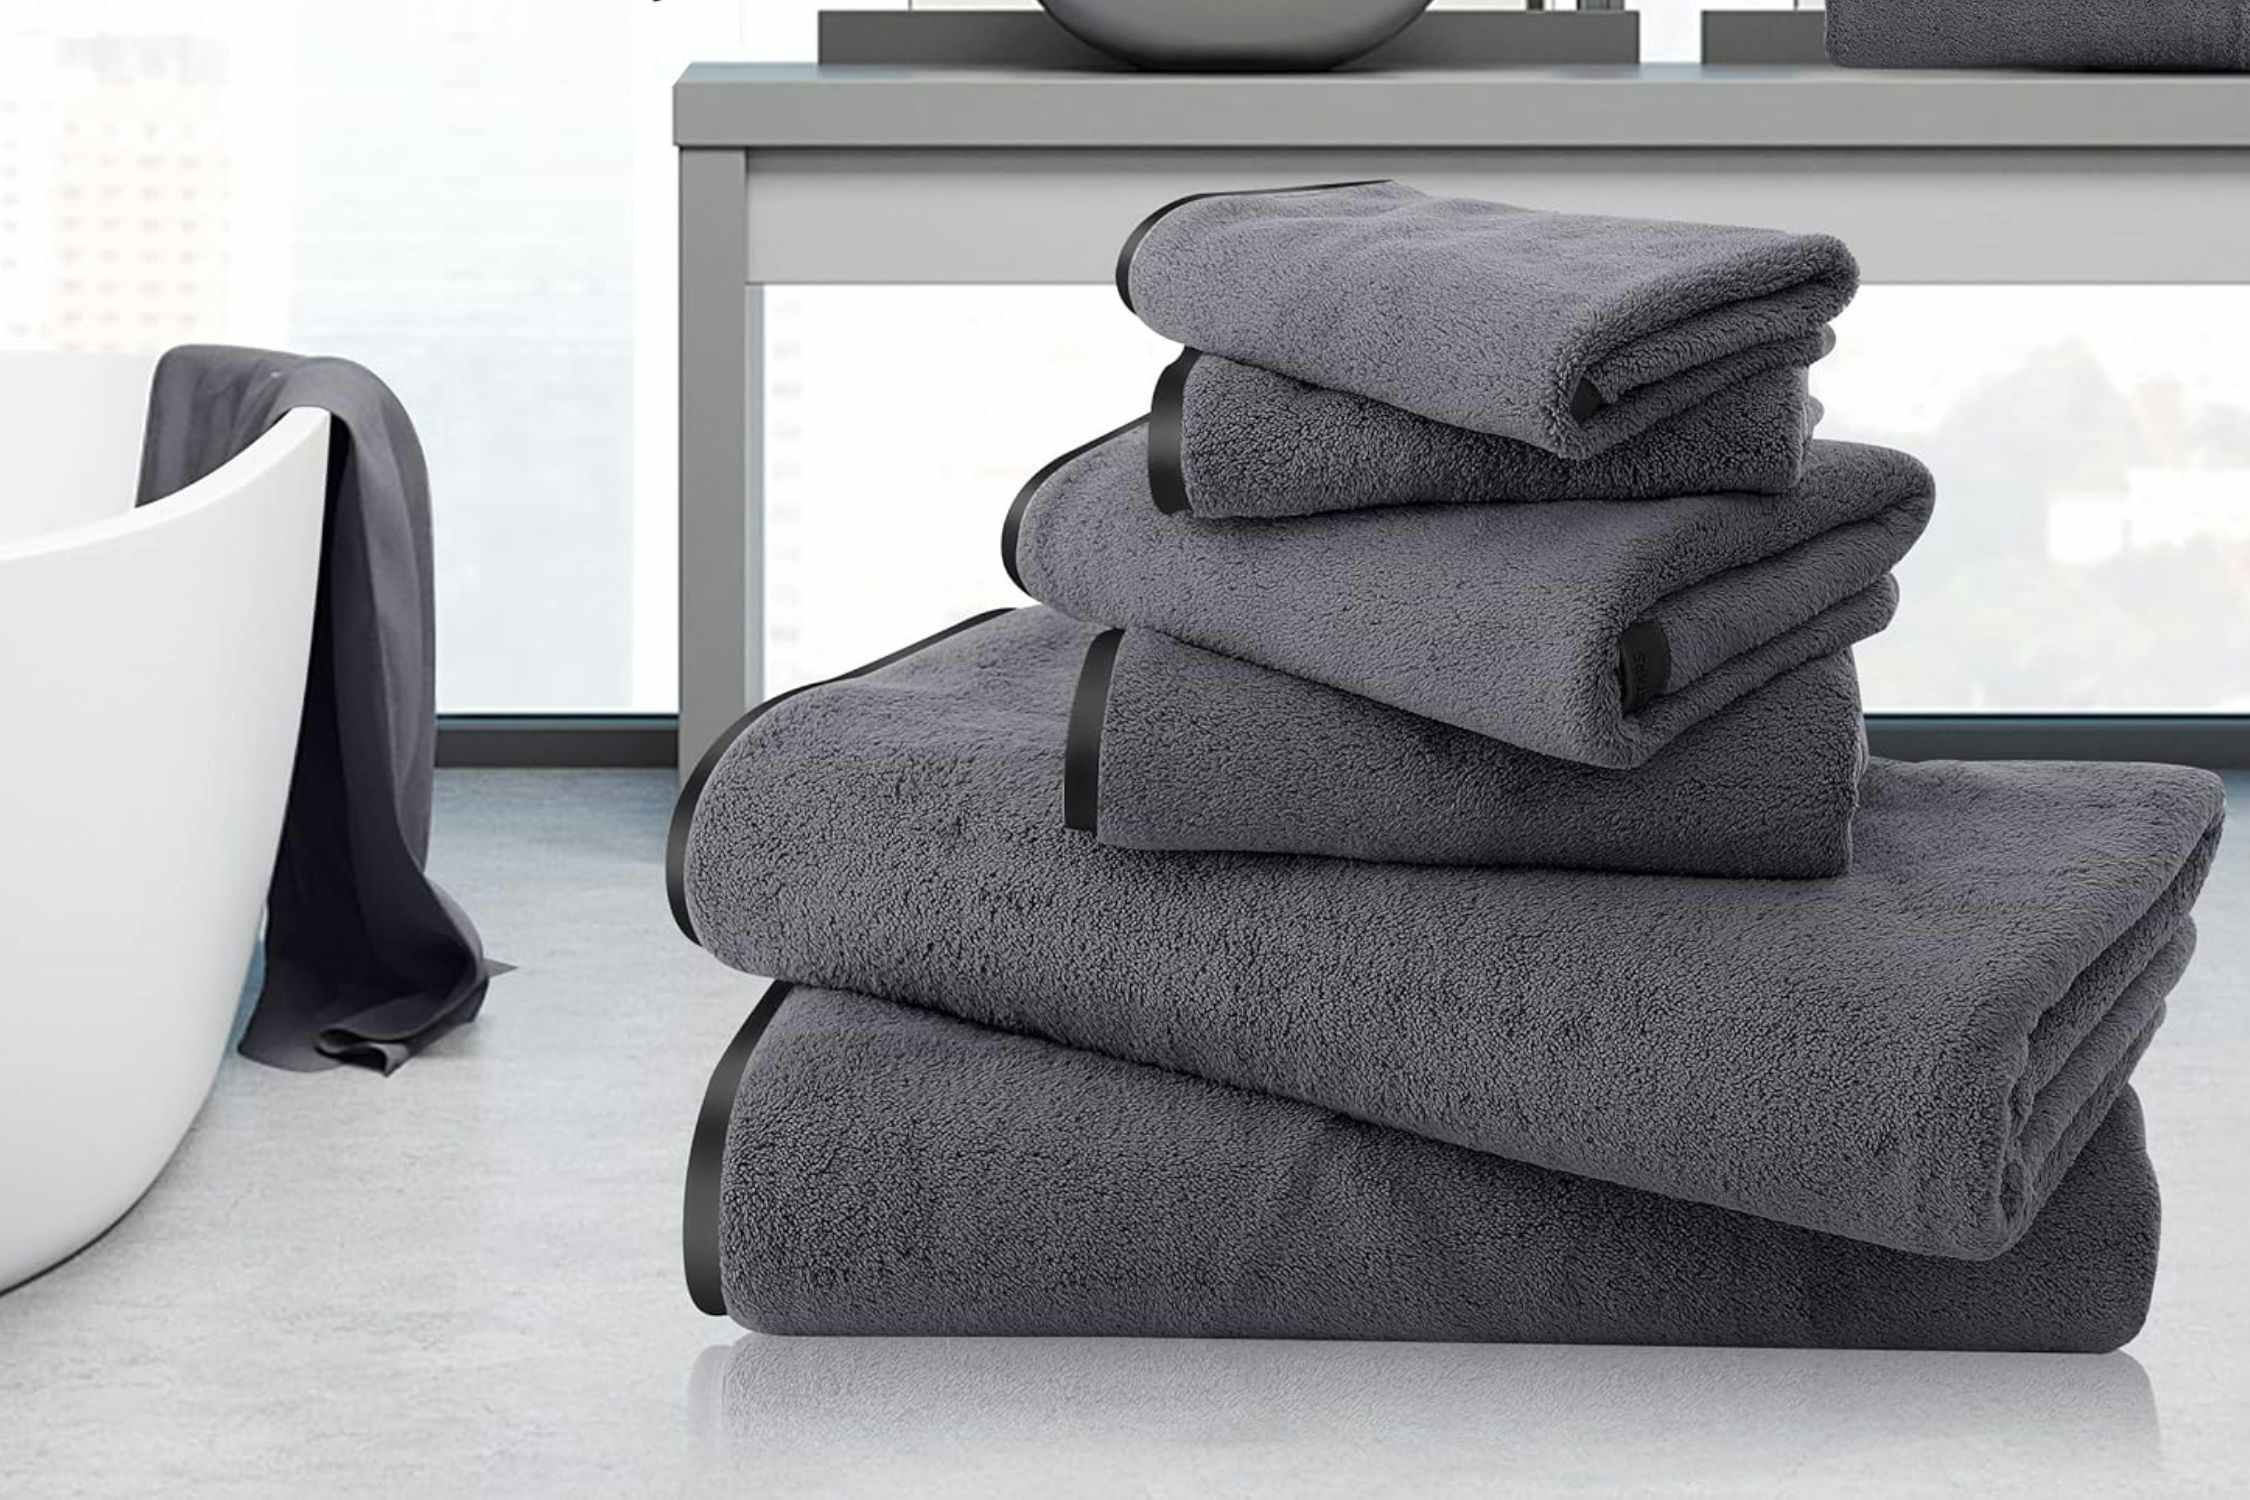 Quick-Drying 6-Piece Towel Set, Just $10 on Amazon